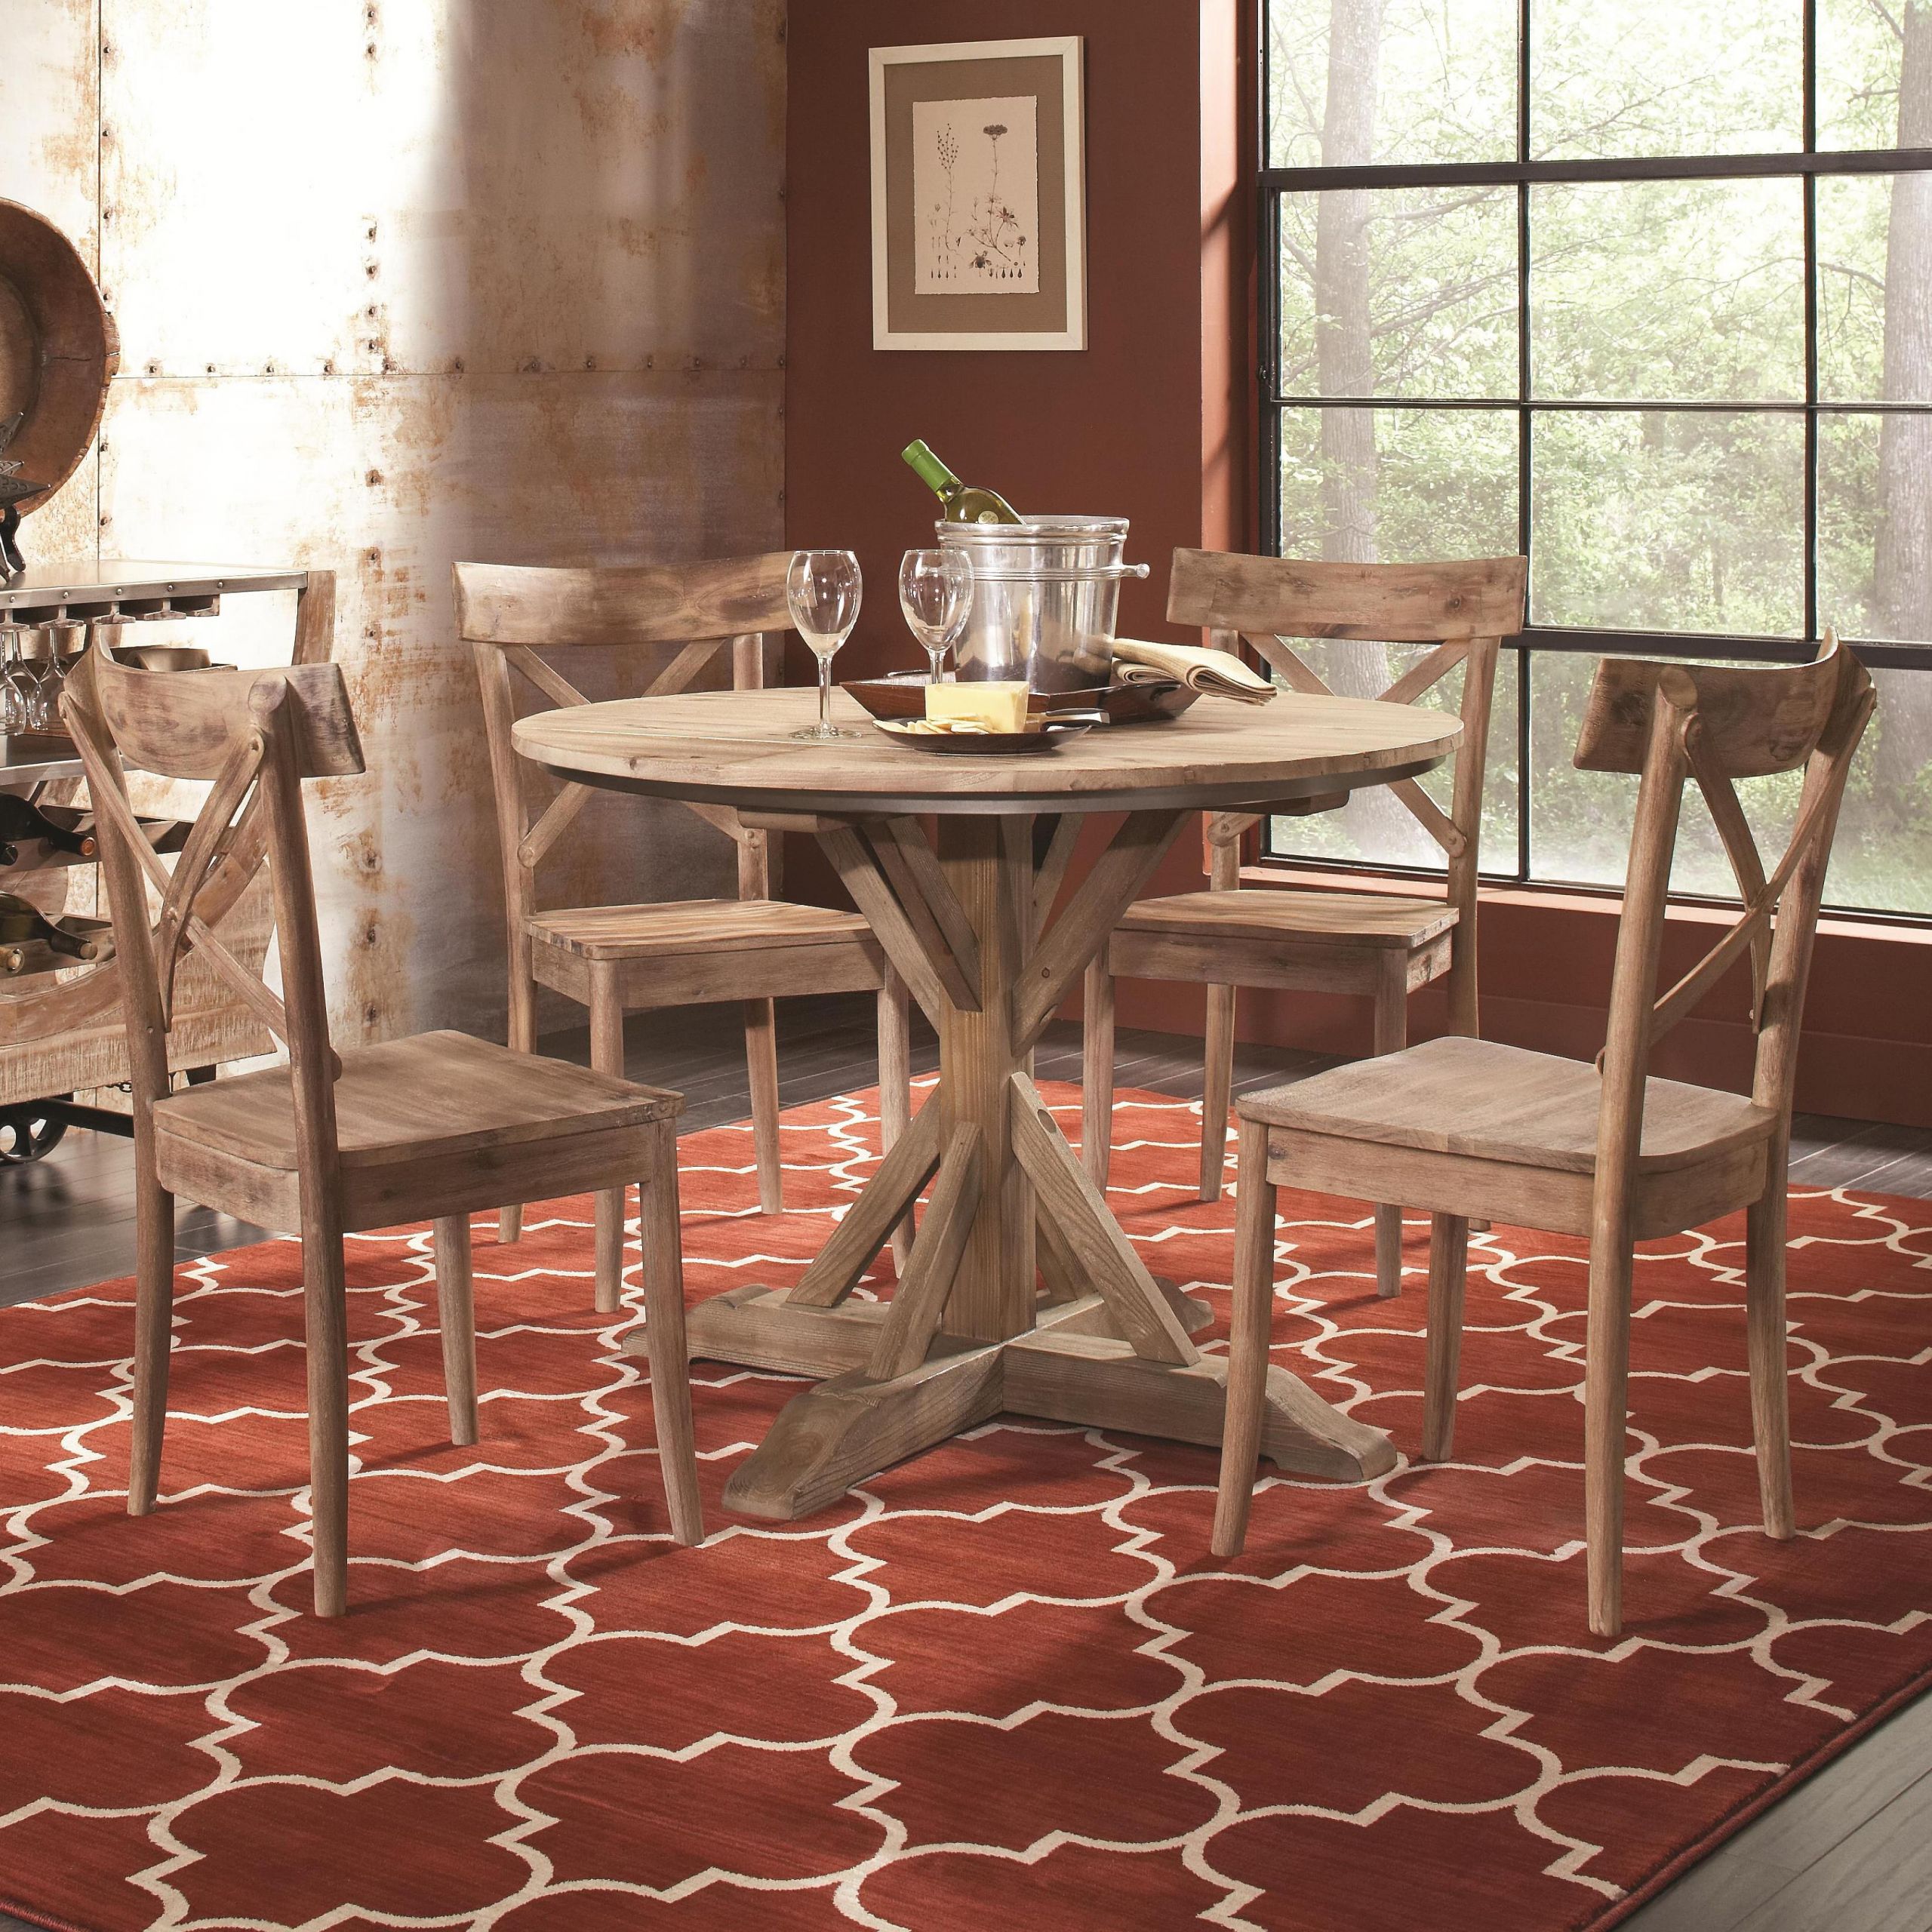 Rustic Round Kitchen Table
 Largo Callista D680 30 Rustic Casual Round Pedestal Table